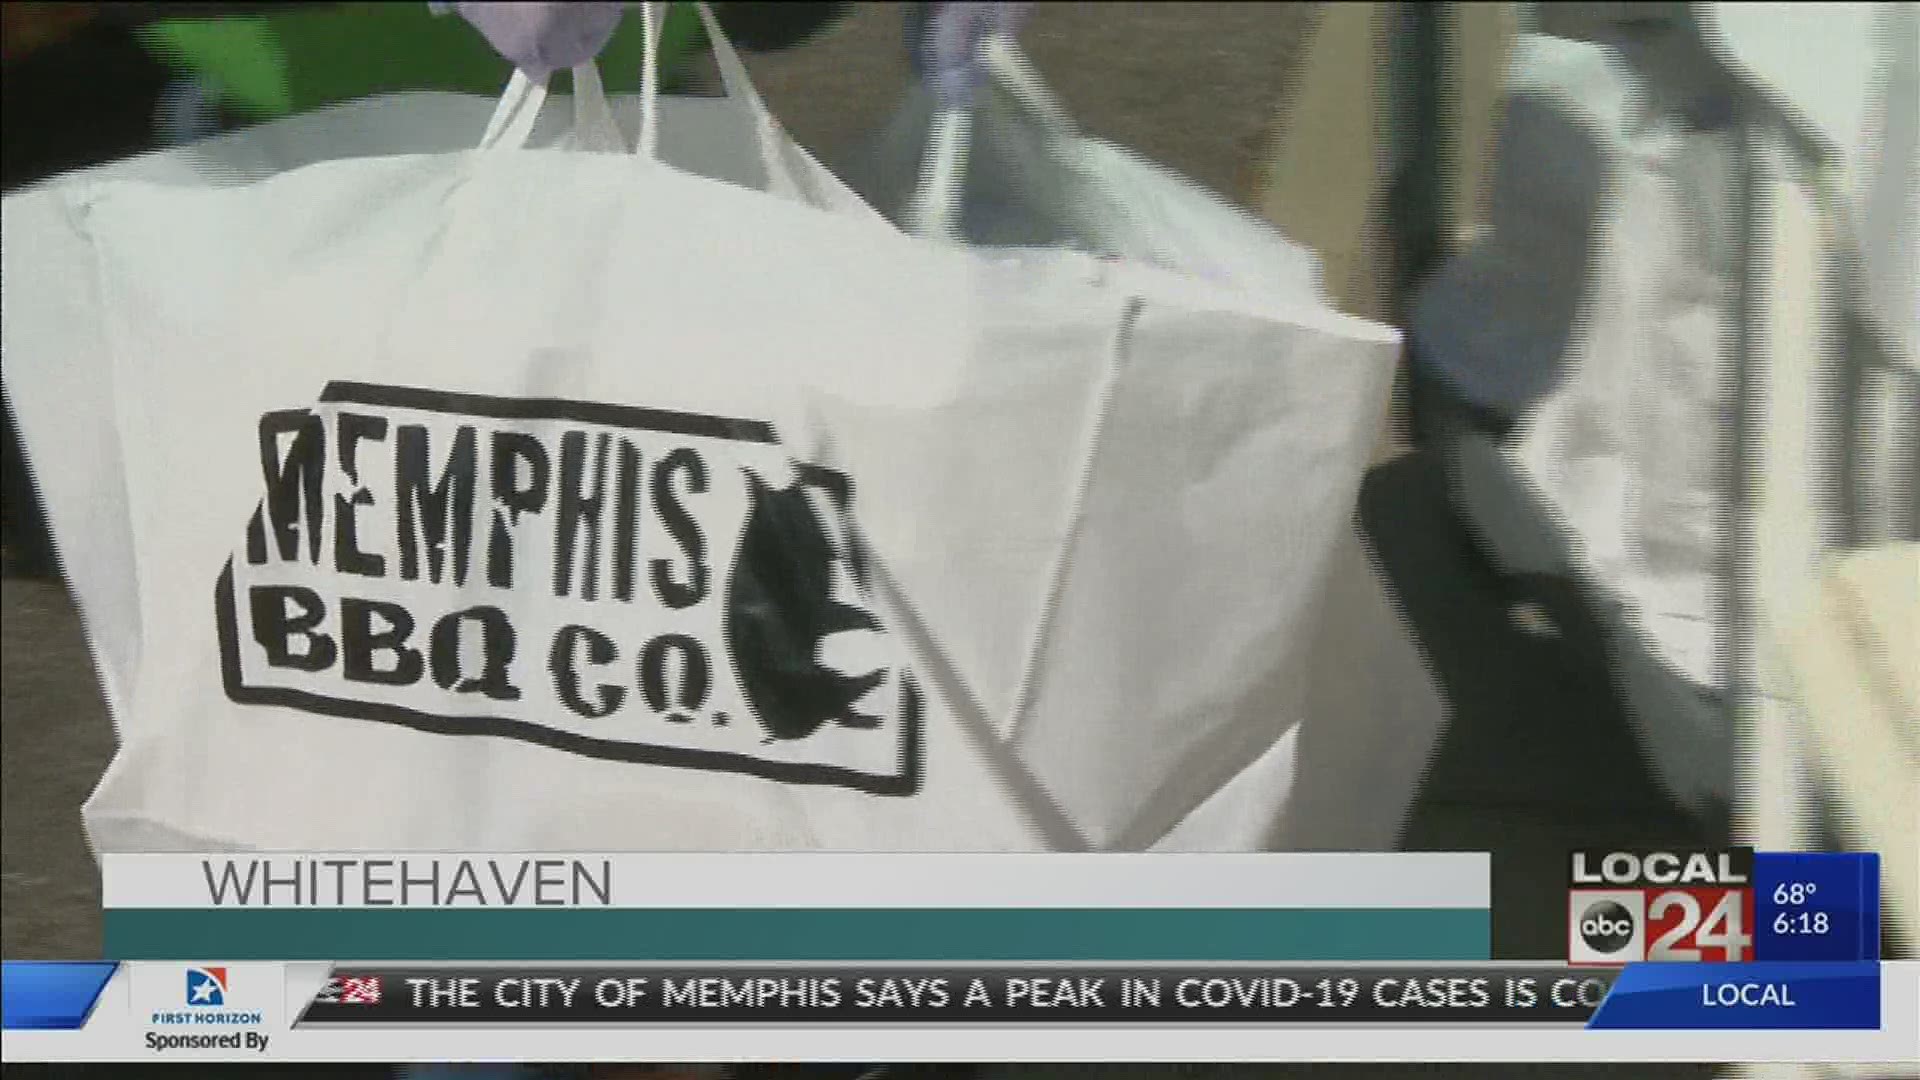 Due to the pandemic, health workers are on the front line taking care of patients exposed to the virus. In light of those workers a Memphis eatery is giving back.